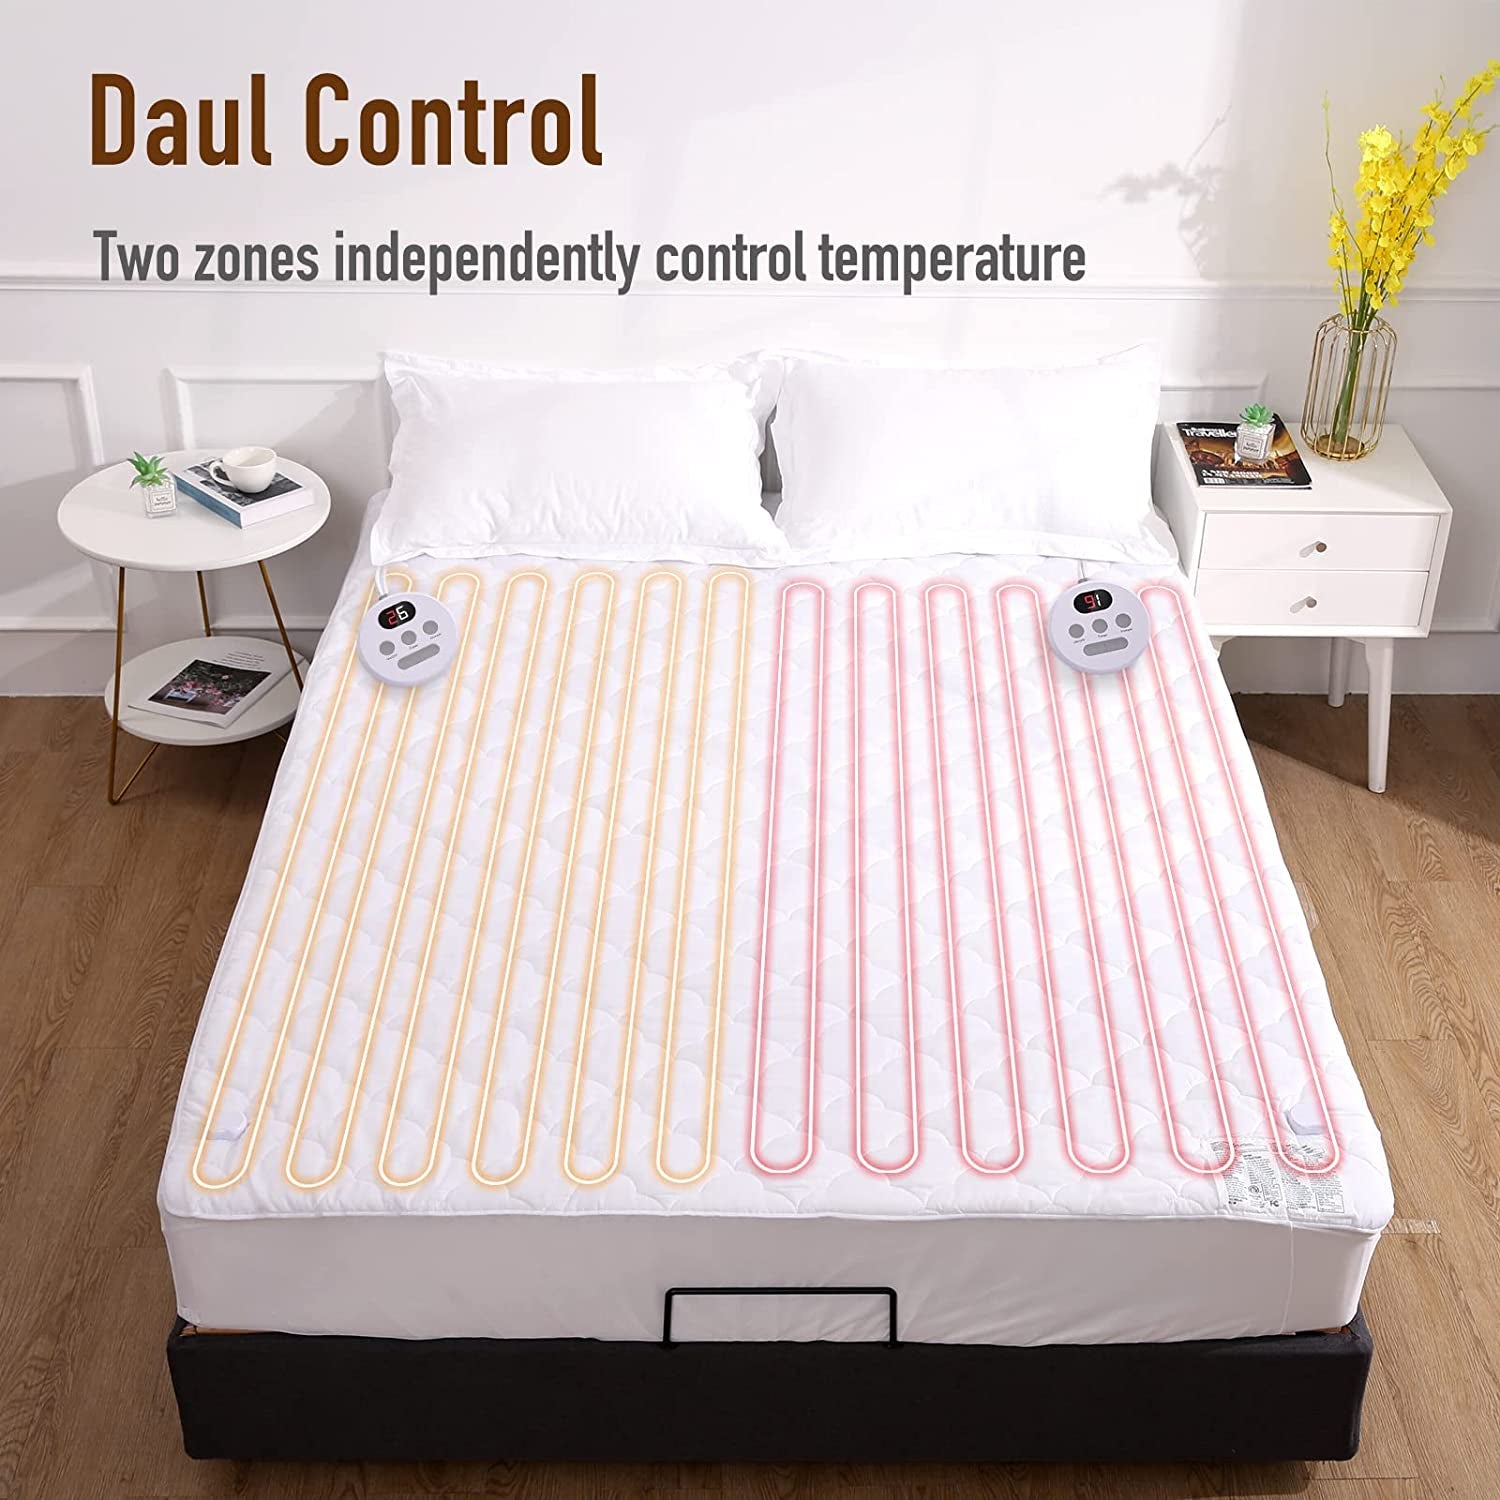 Heated Mattress Pad Queen Size 60"X80" Cover Comfort Soft Cloud Pattern with Dual Controllers, 10 Heating Levels & 10 Hours Timer Auto Shut Off, Electric Bed Warmer Pad up to 15" Deep Pocket